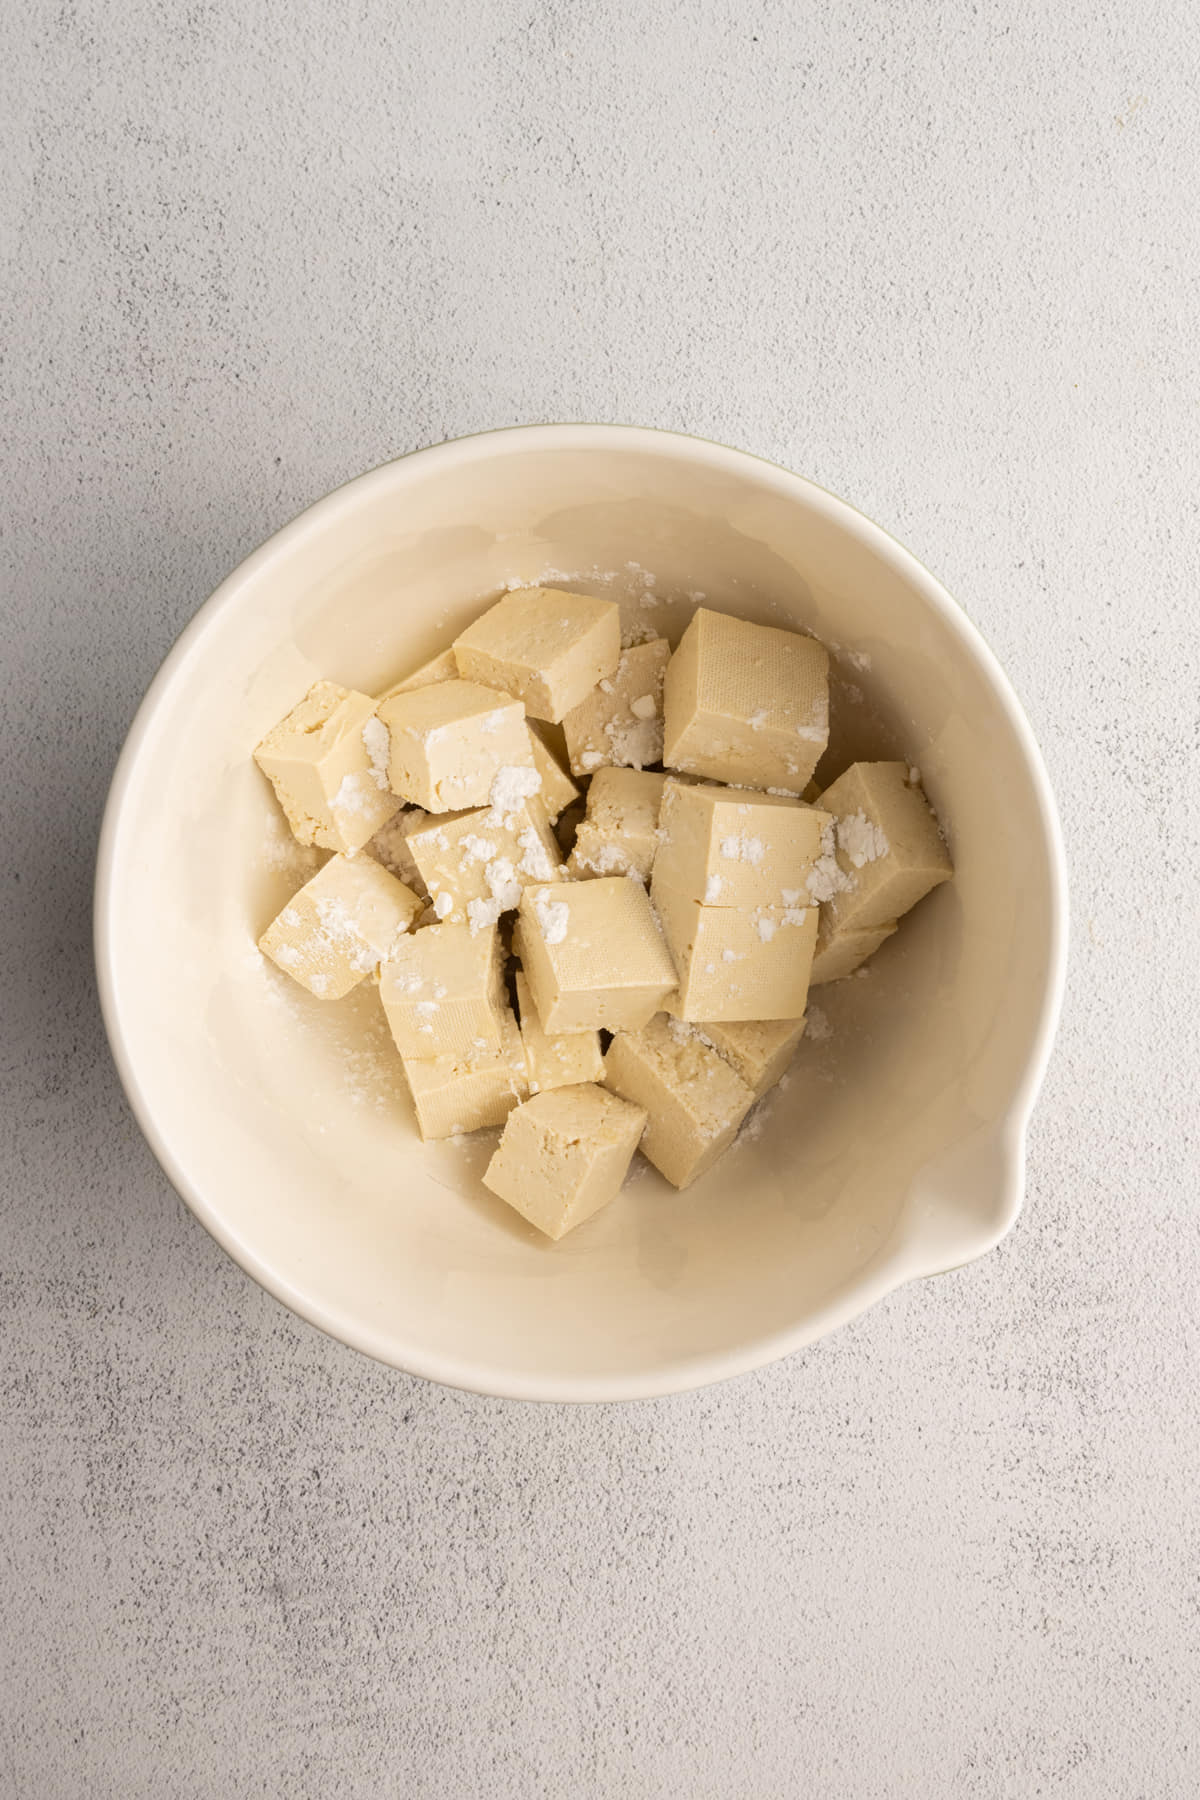 Adding cubed tofu to a mixing bowl to toss it with cornstarch and olive oil